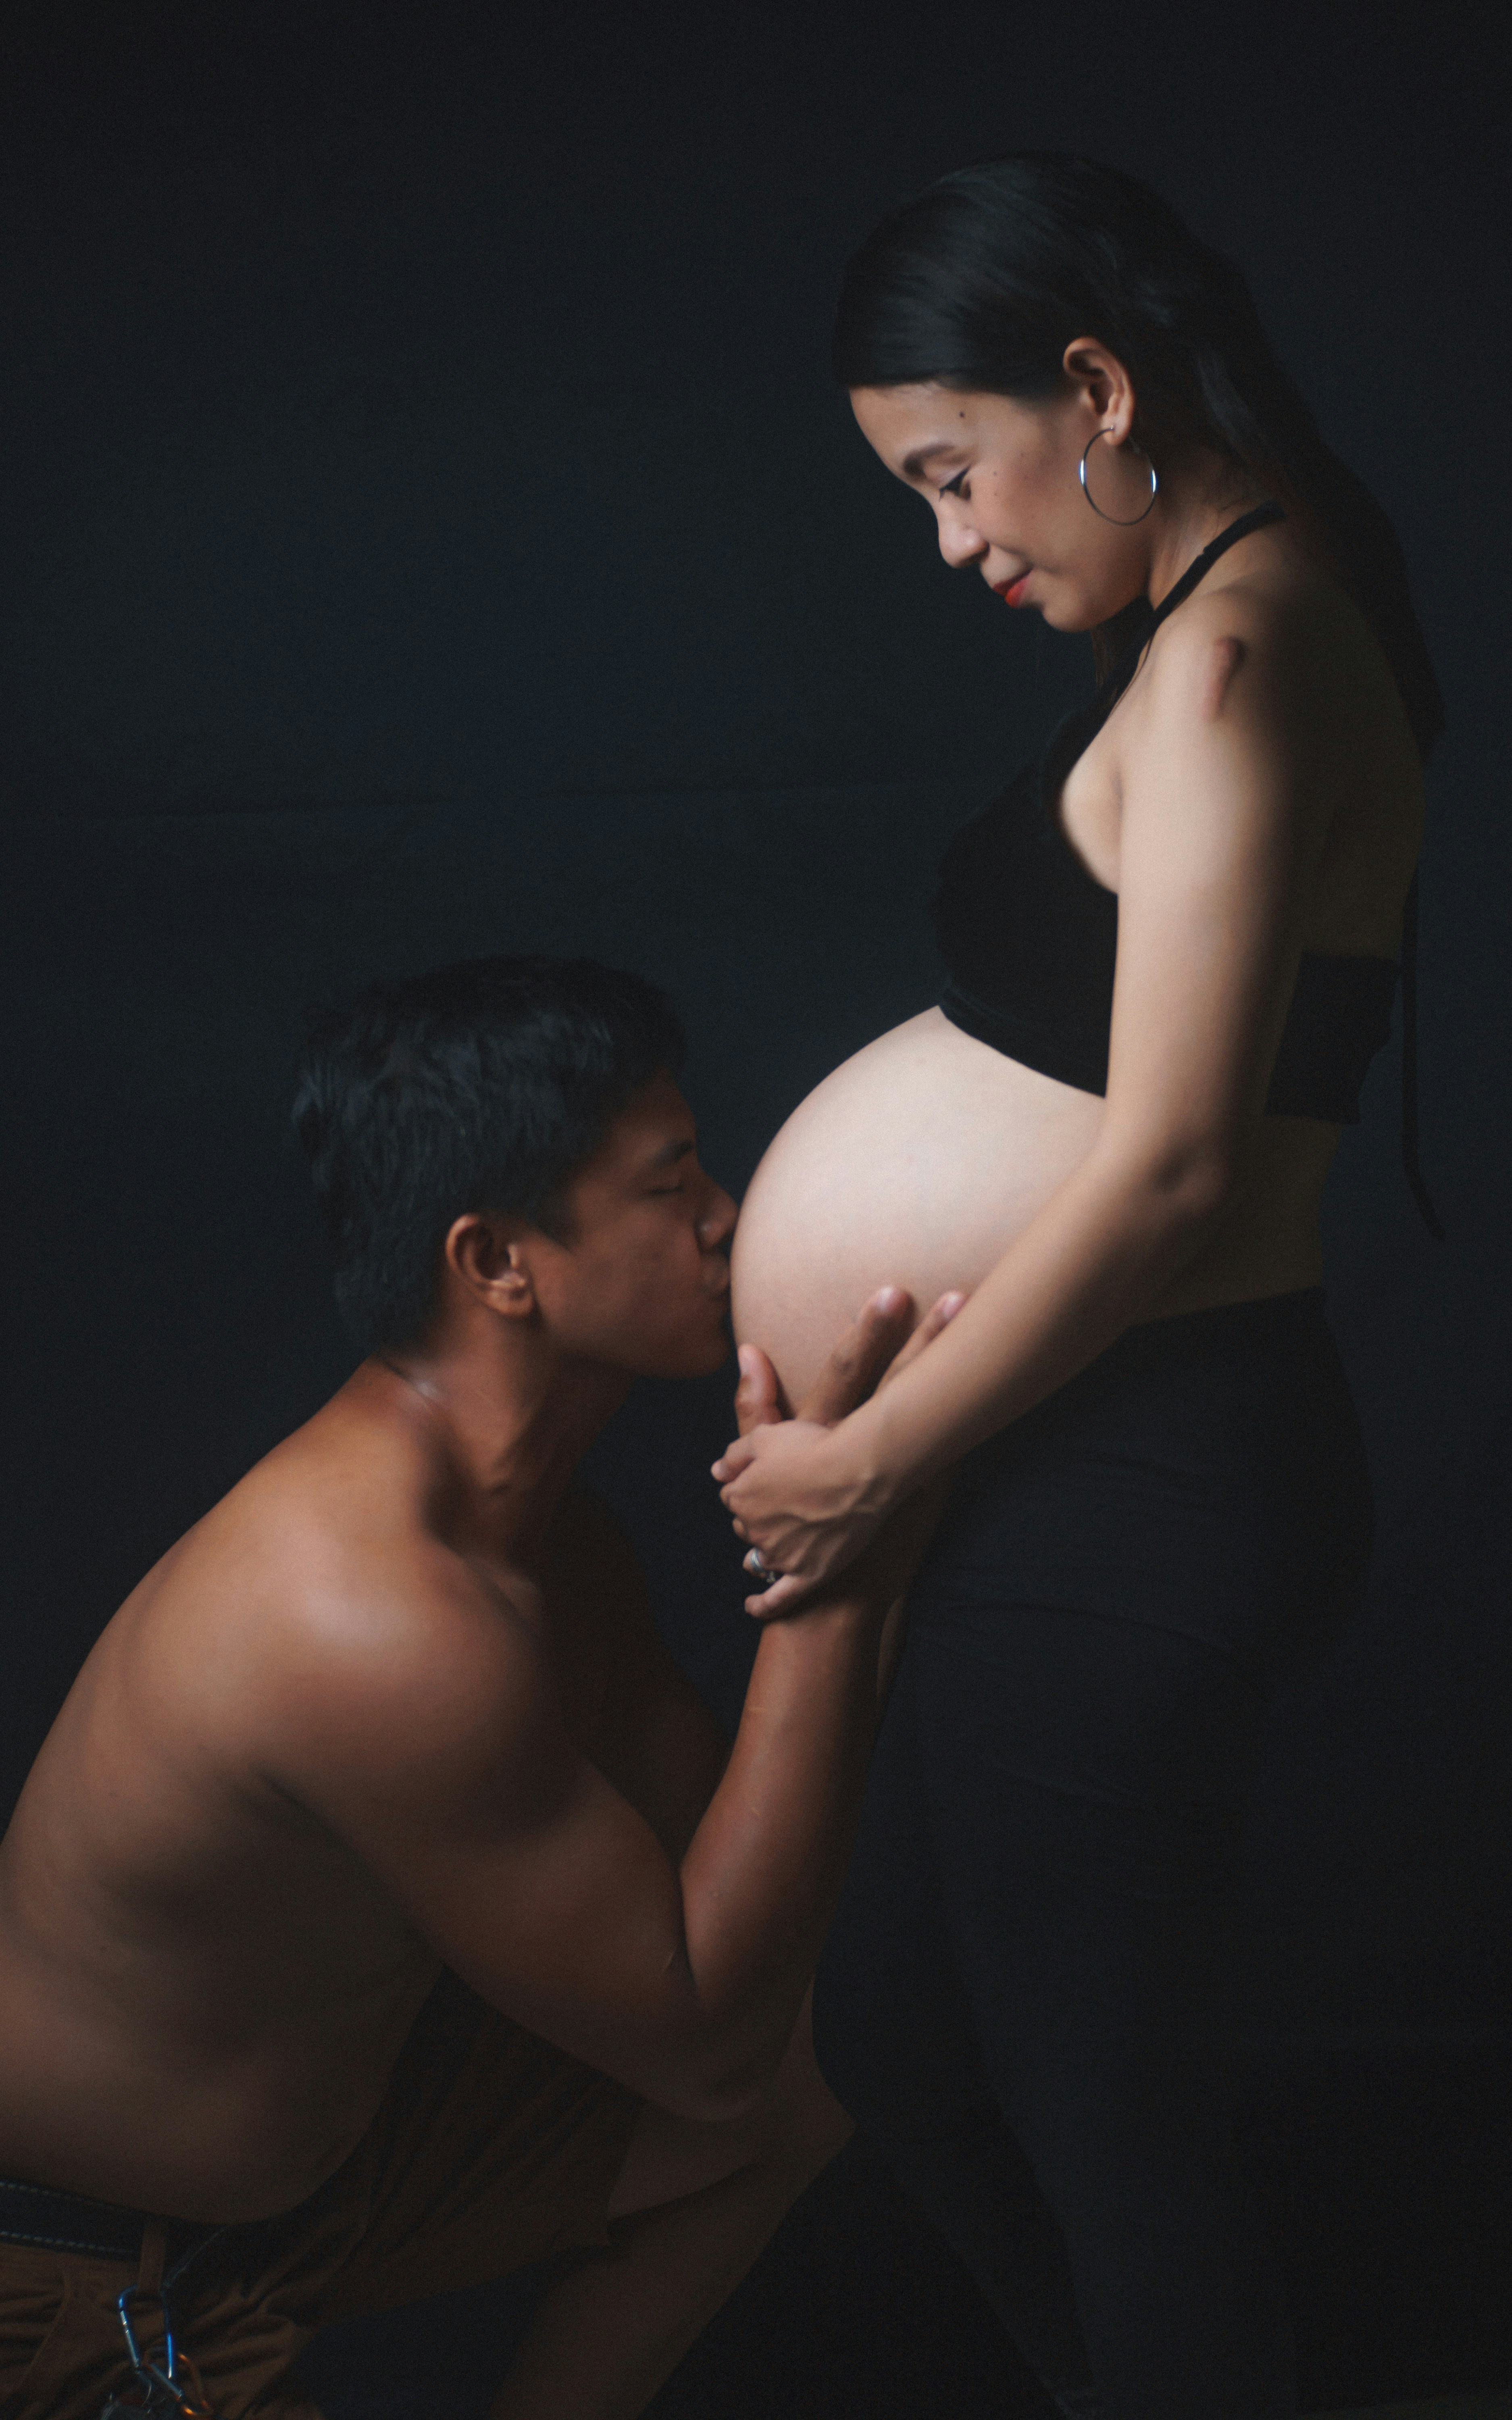 A pregnant man and a pregnant woman posing for a photo photo photo pic